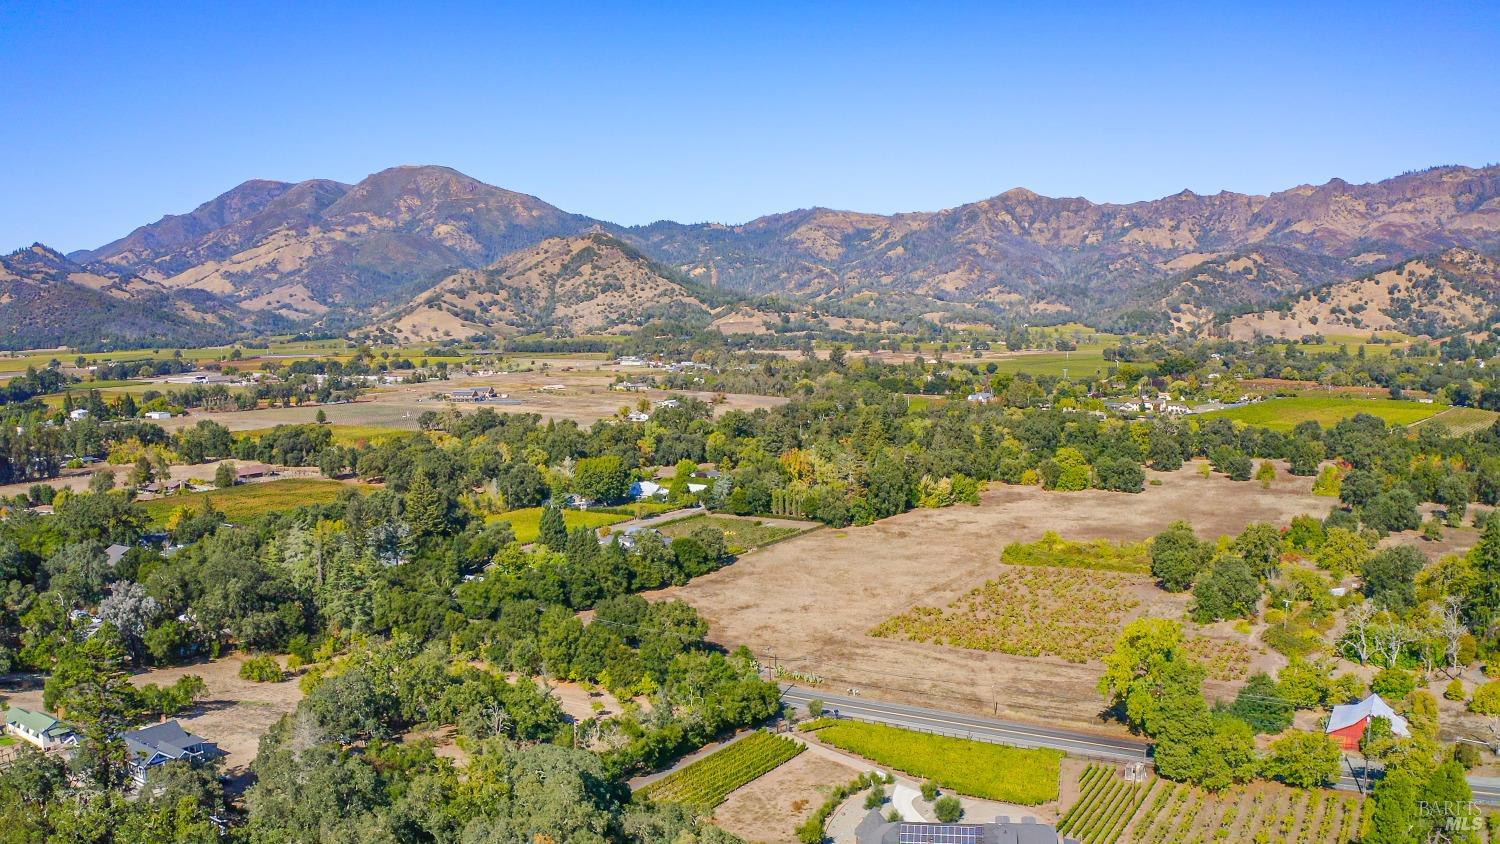 Welcome to 2779 Foothill Blvd where the views are nothing but spectacular!